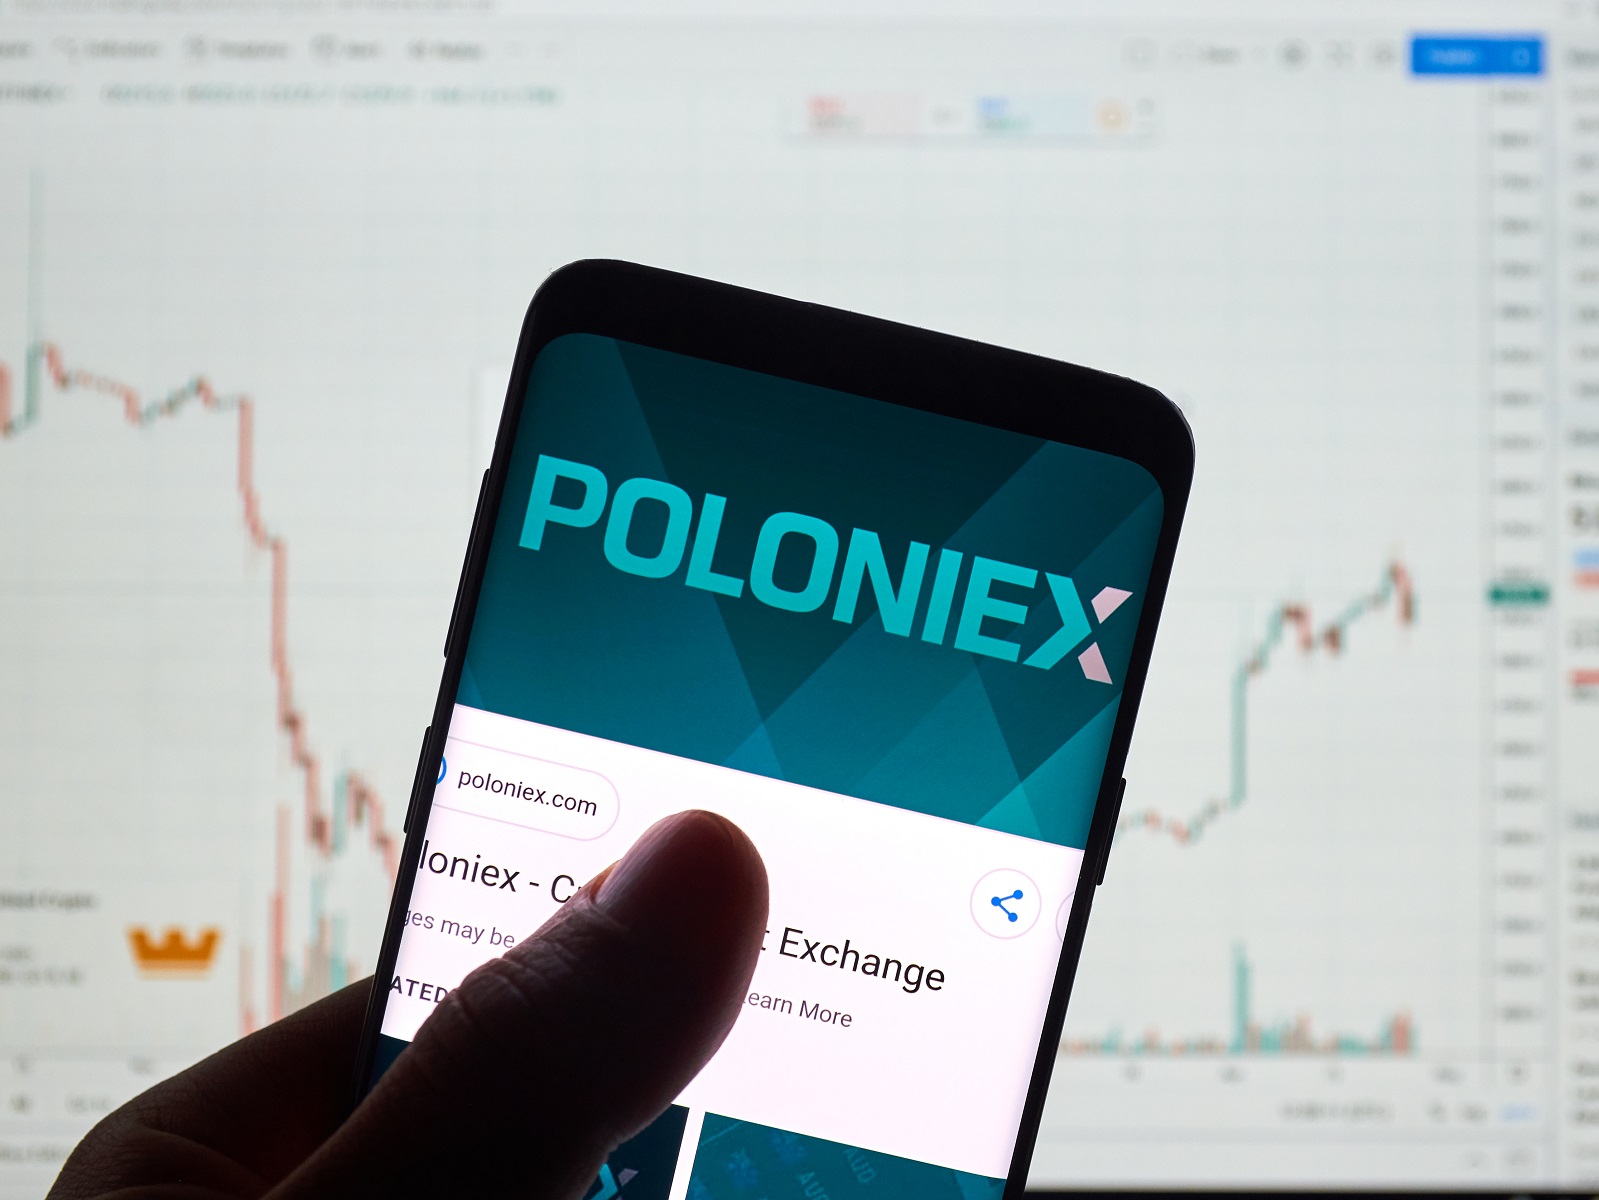 Poloniex Restores Unverified Accounts With Unlimited Trading